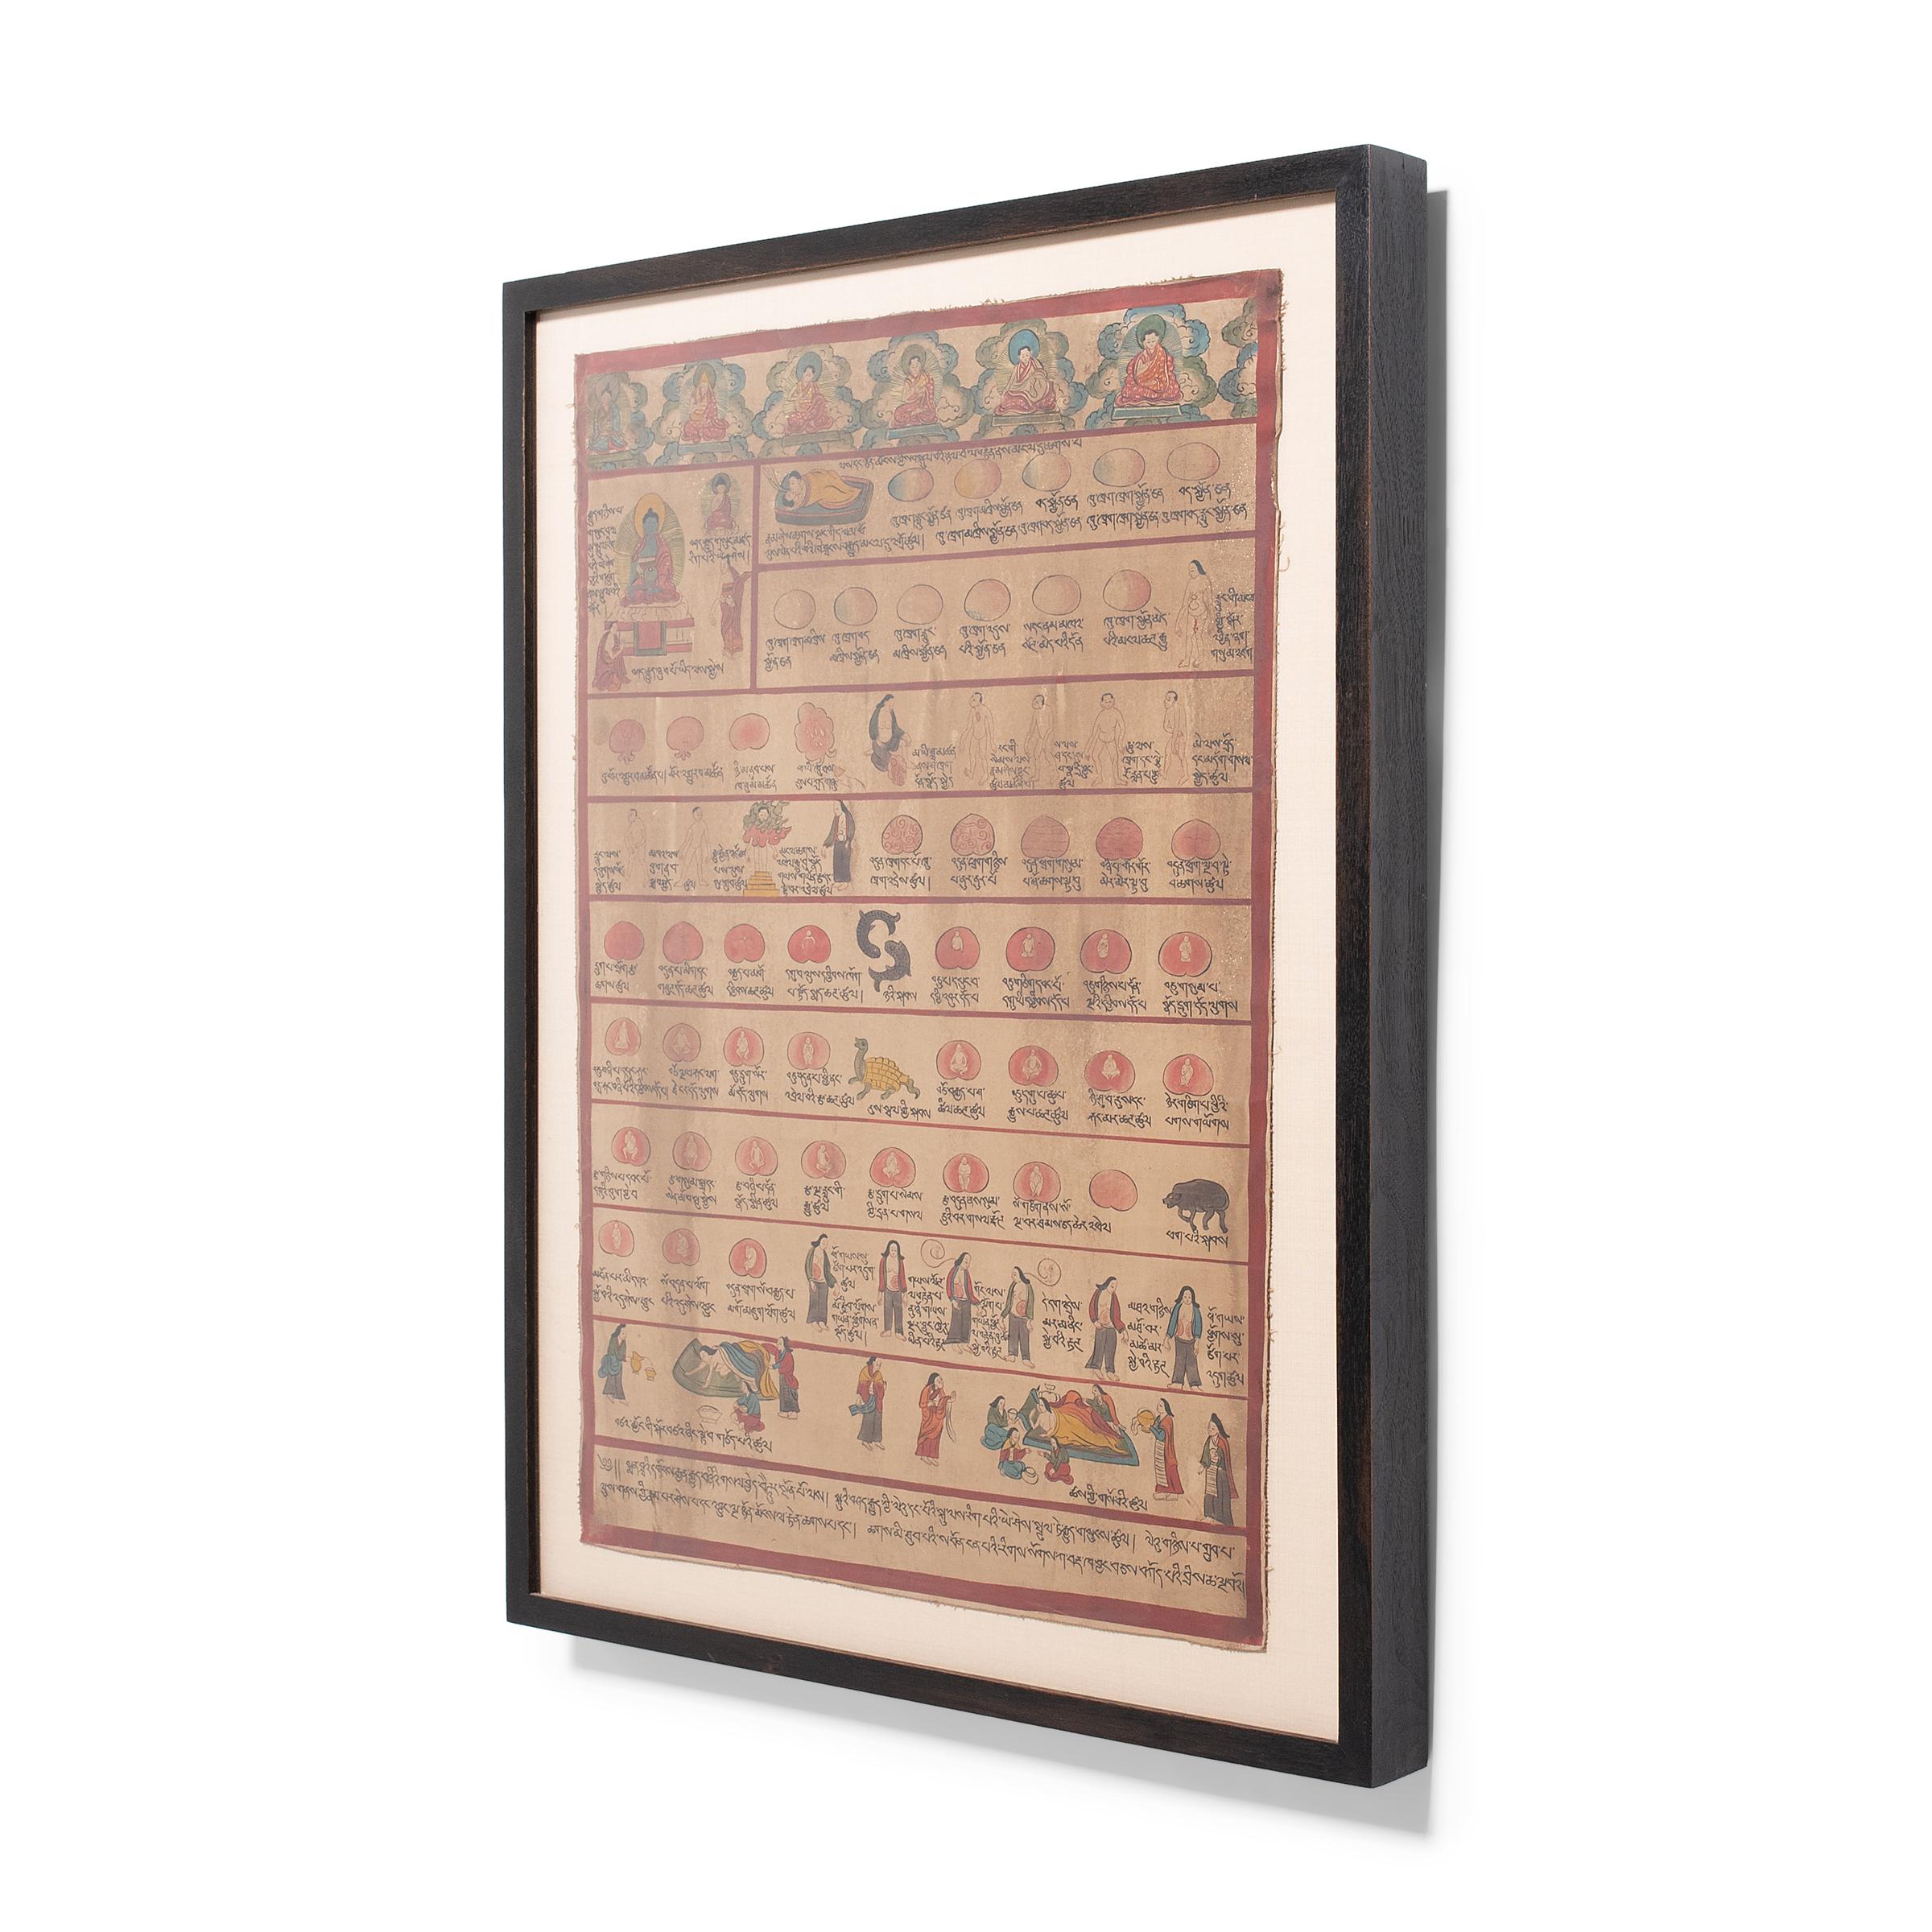 Tibetan Childbirth Manuscript Painting - Brown Figurative Painting by Unknown